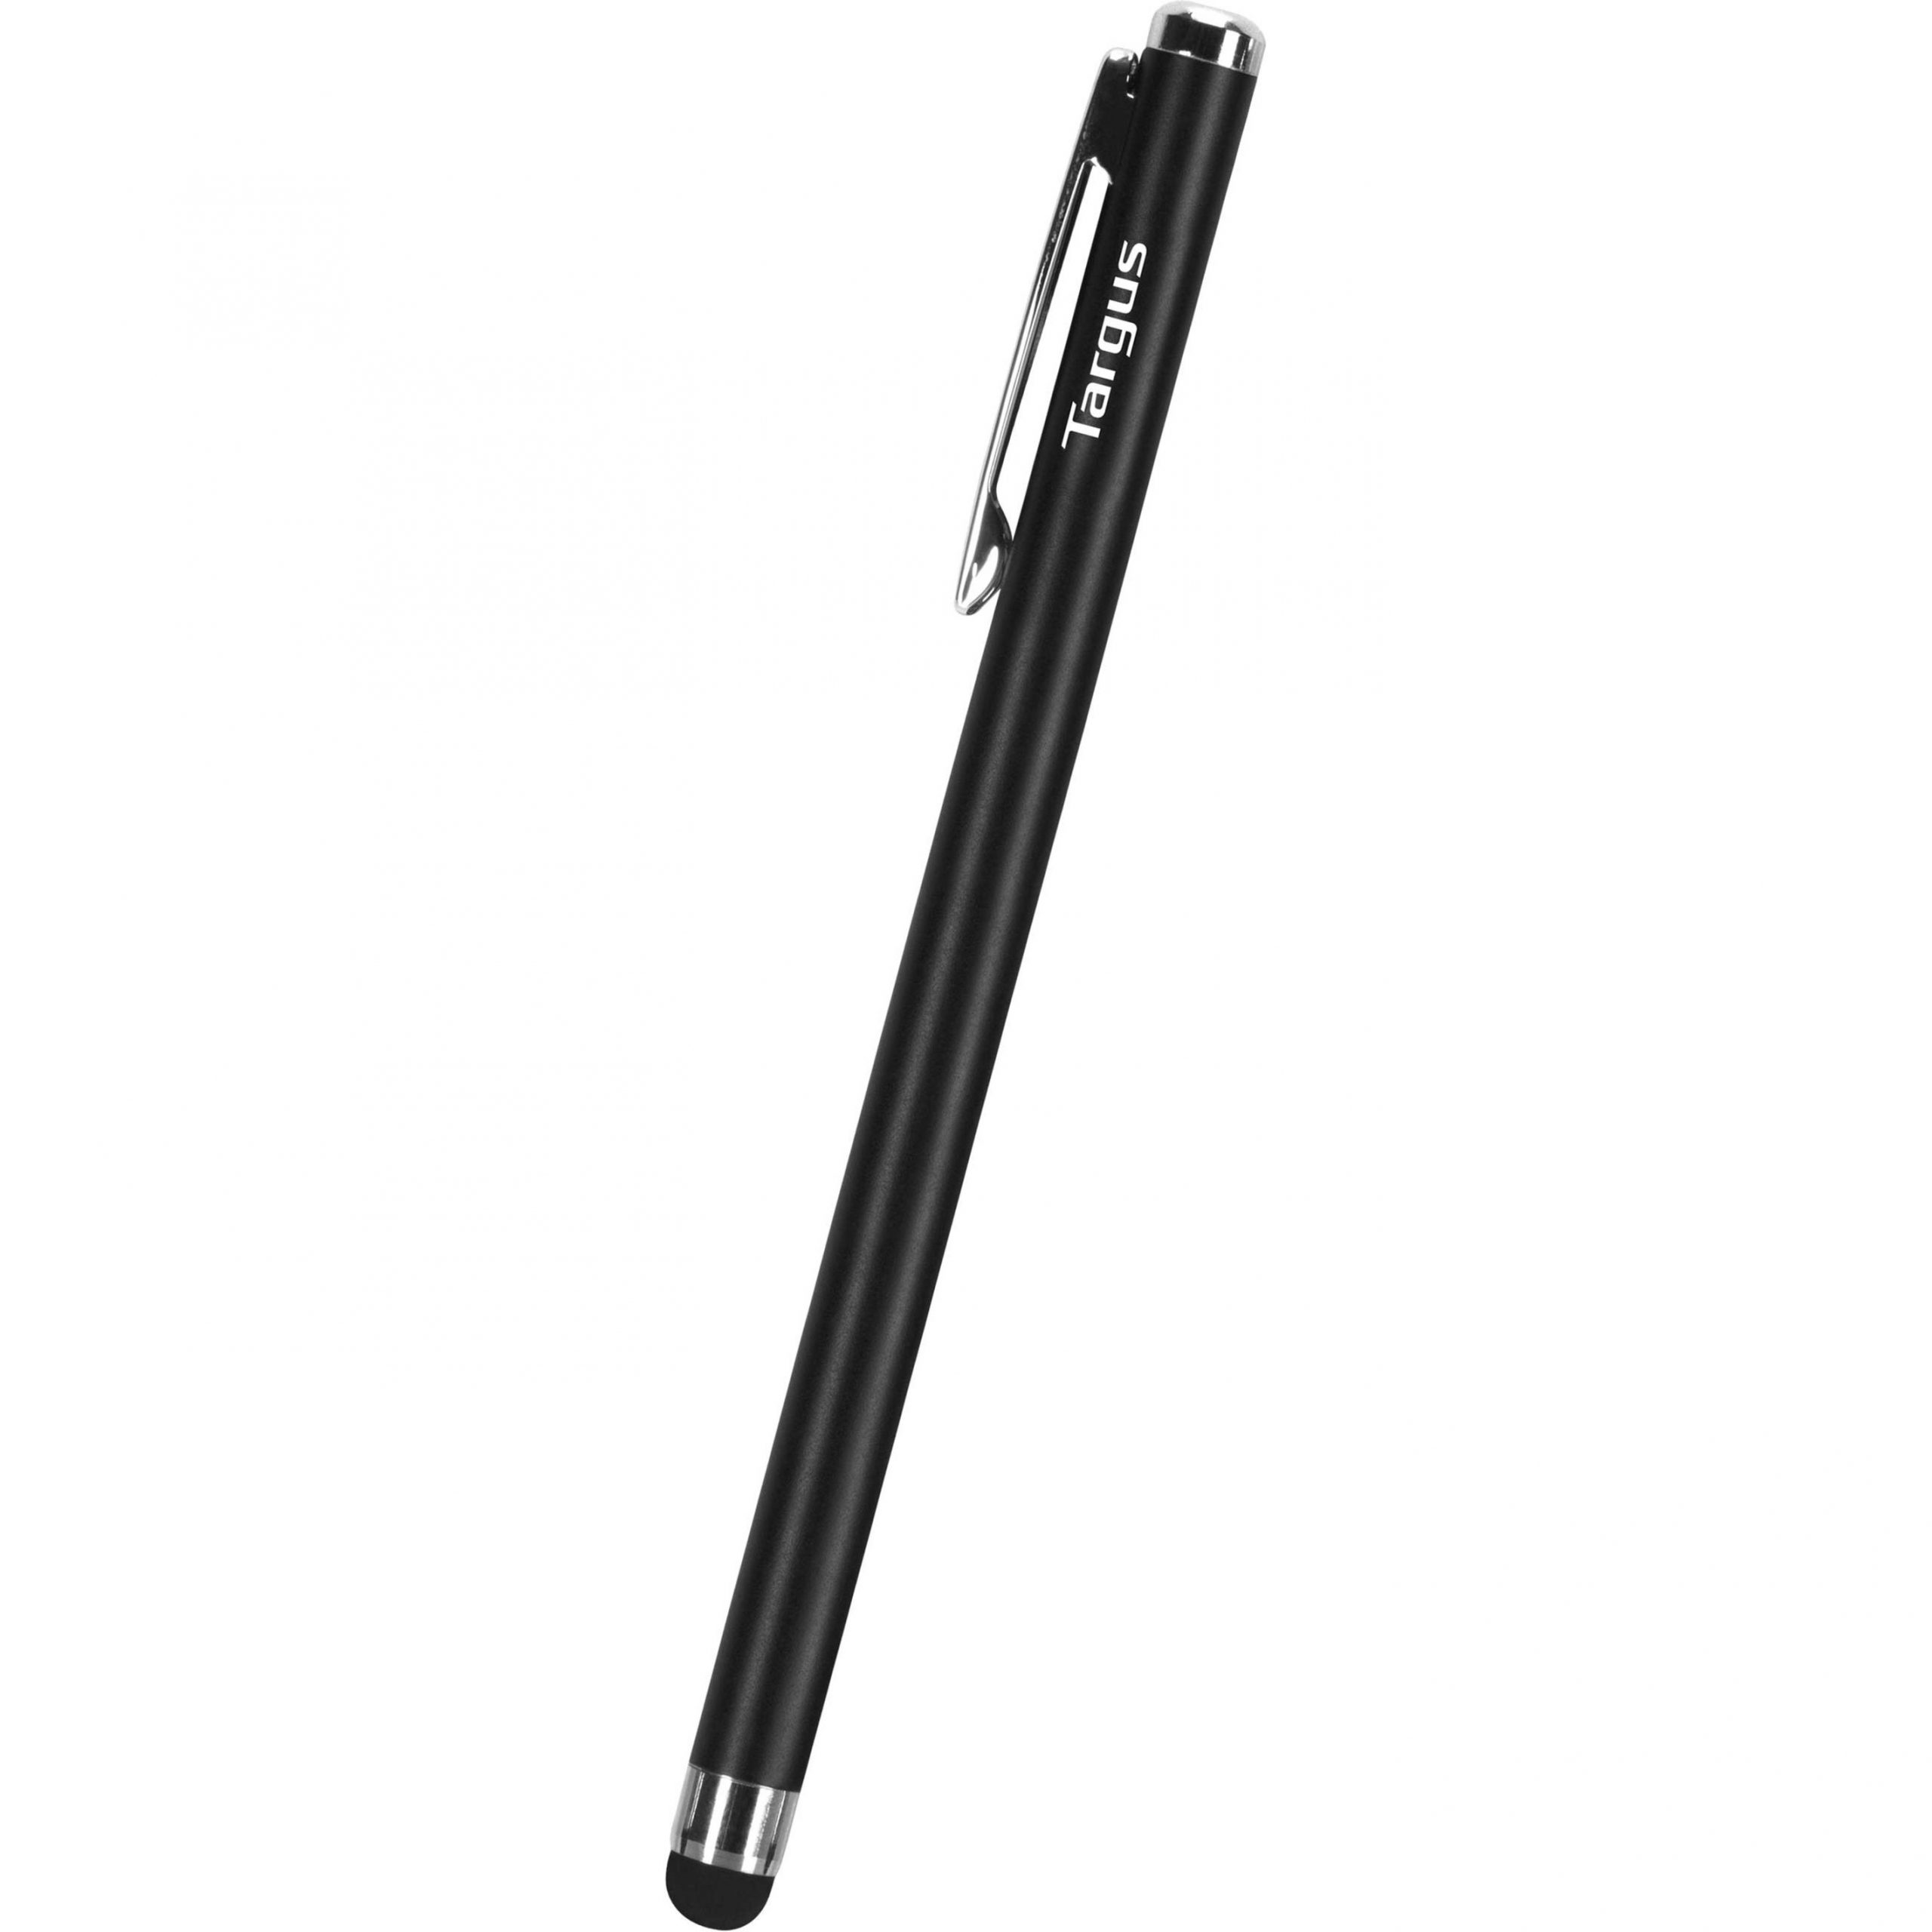 Targus Slim Stylus for Smartphones (Black)Capacitive Touchscreen Type Supported0.24″RubberBlackTablet, Smartphone Device Supporte… AMM12US